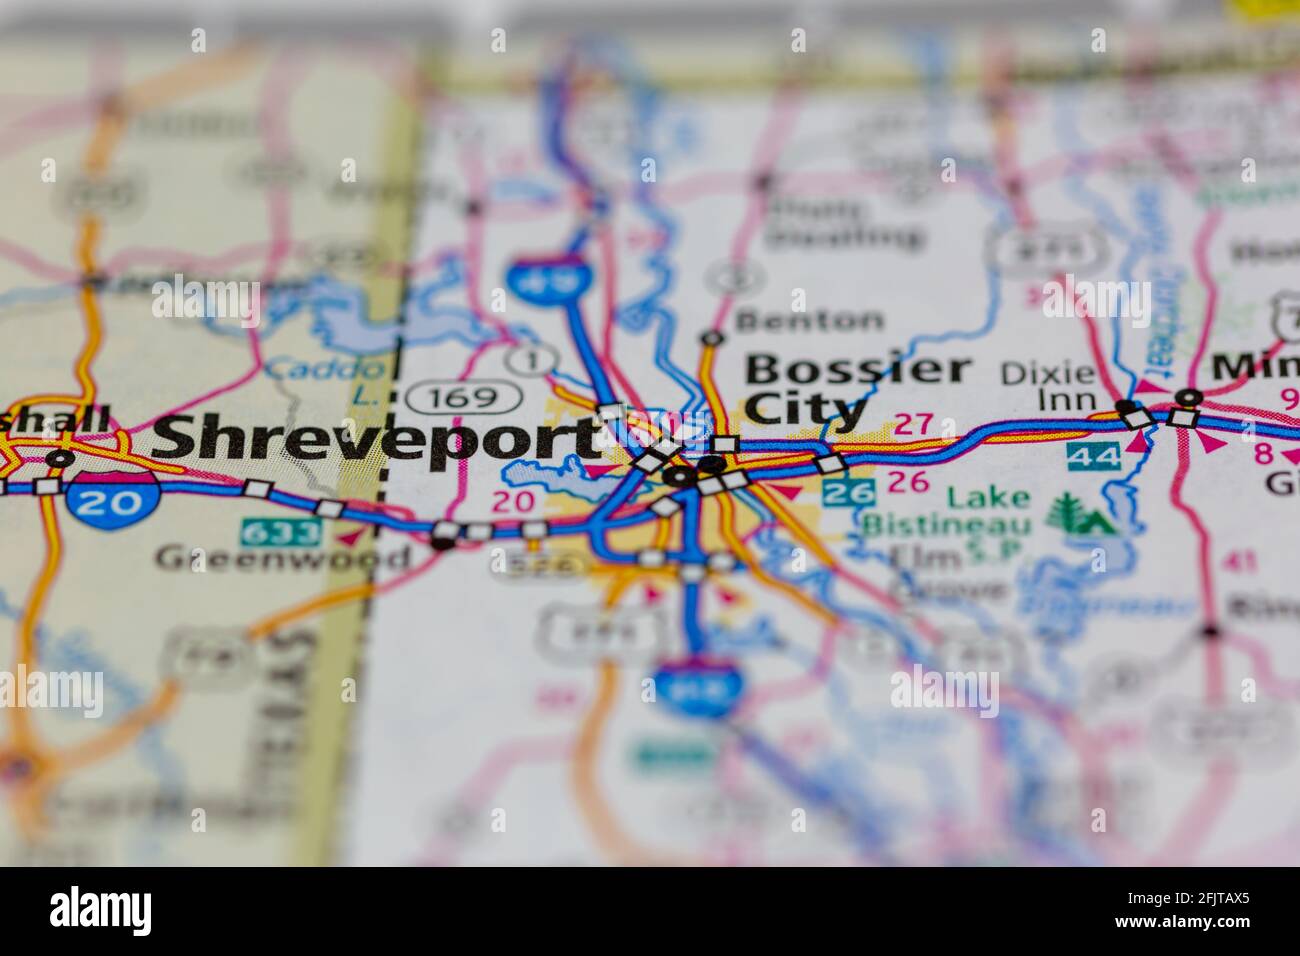 Shreveport Louisiana USA and surrounding areas Shown on a road map or Geography map Stock Photo